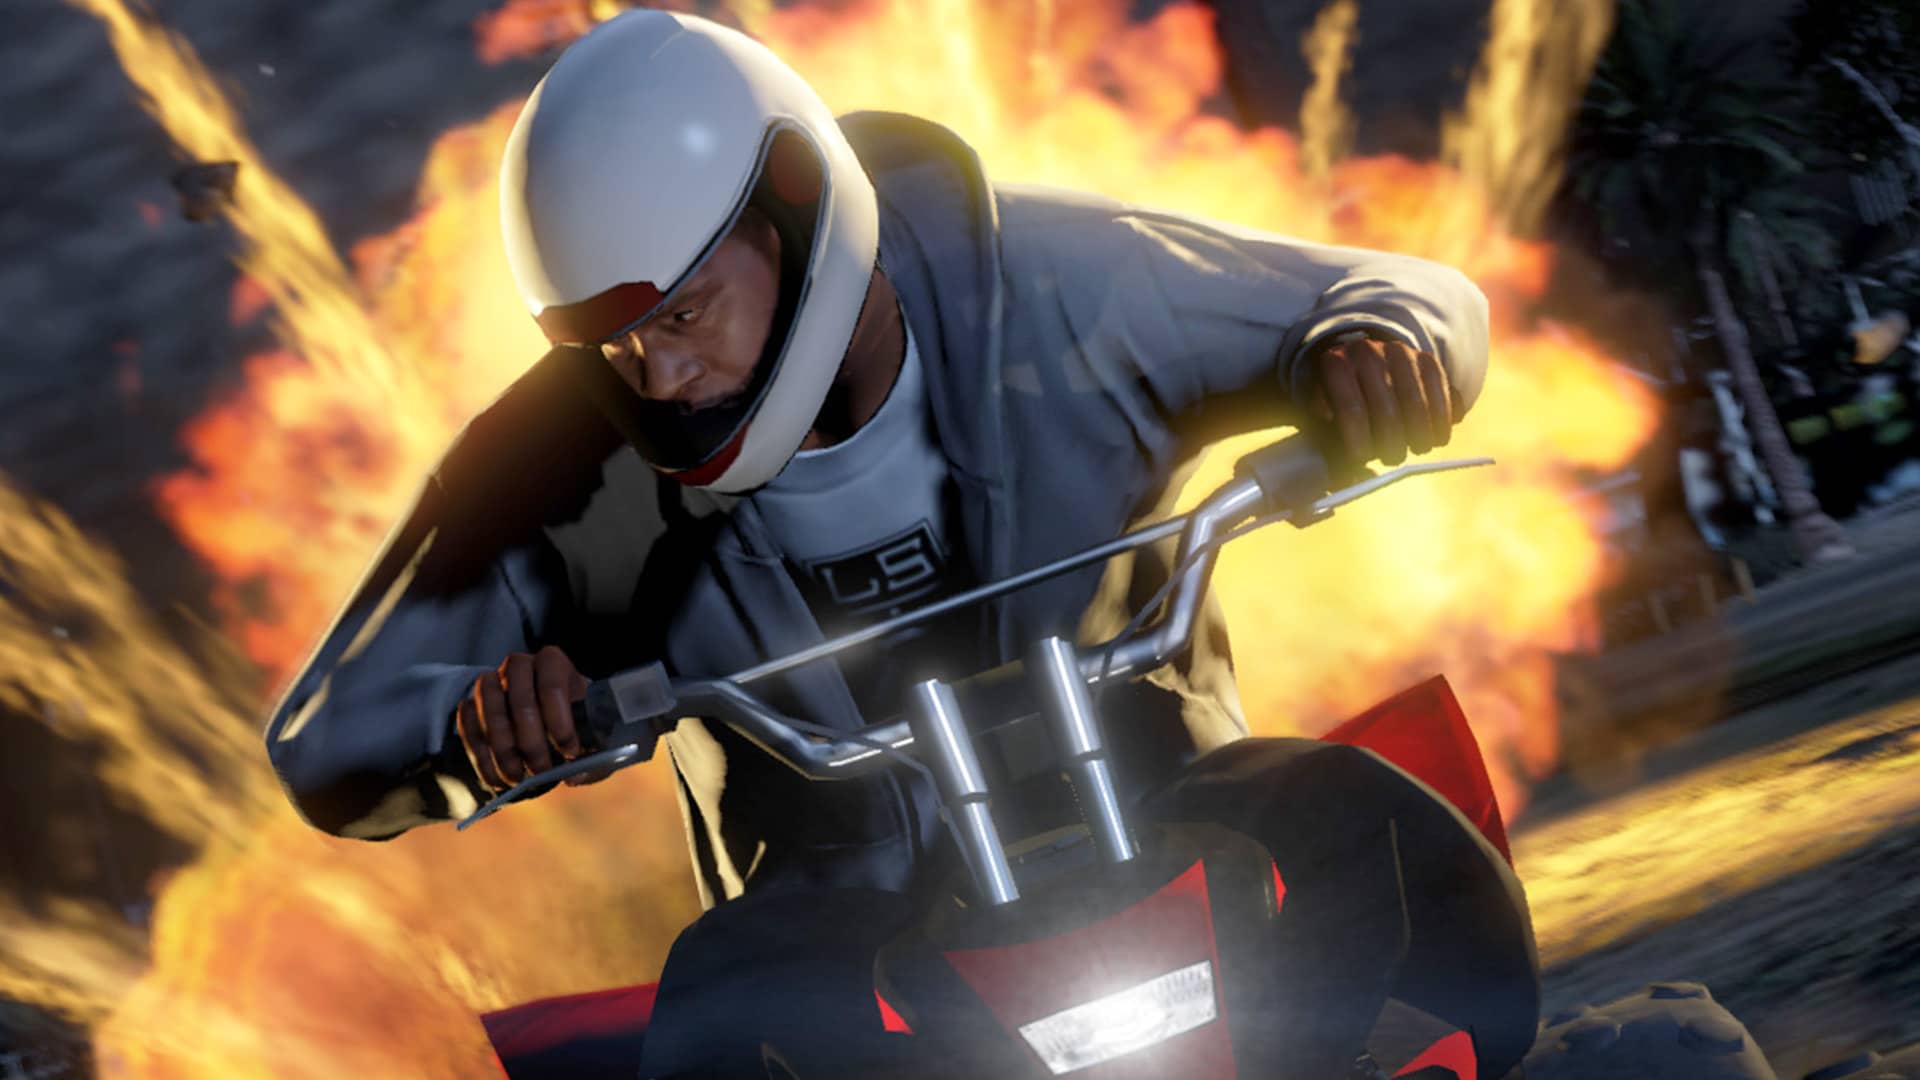 Players in GTA Online shows why explosive ammo is so powerful